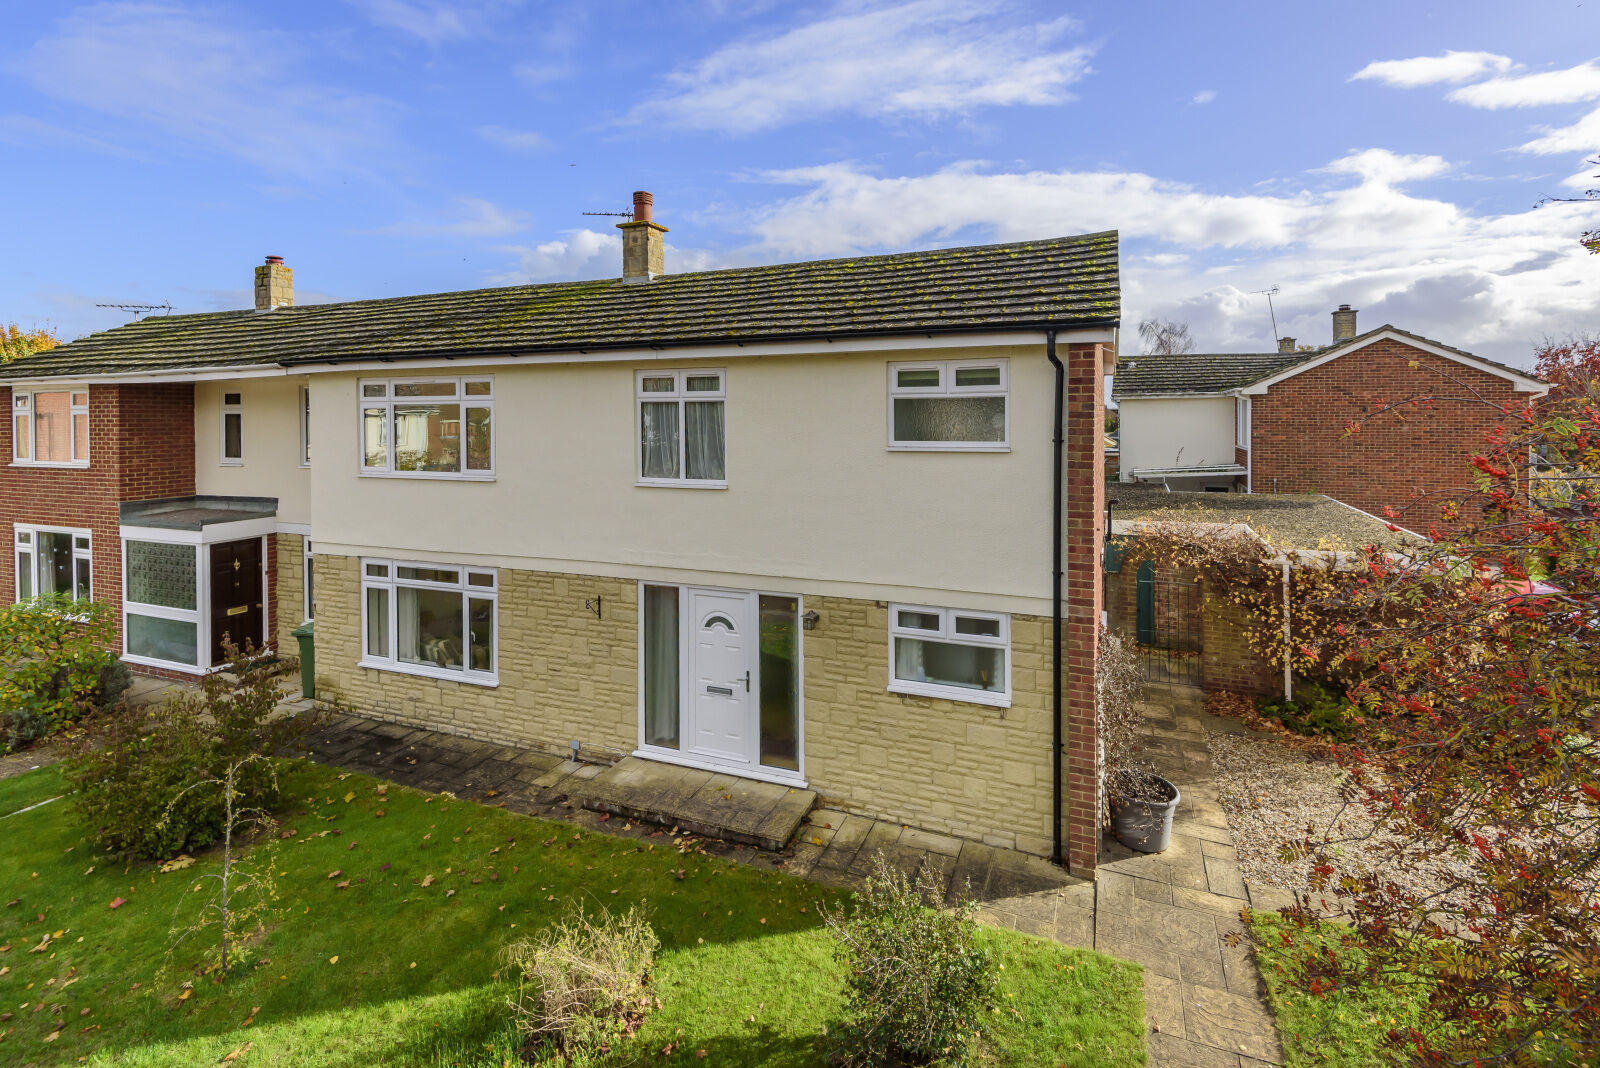 3 bedroom semi detached house for sale Morland Road, Marcham, OX13, main image